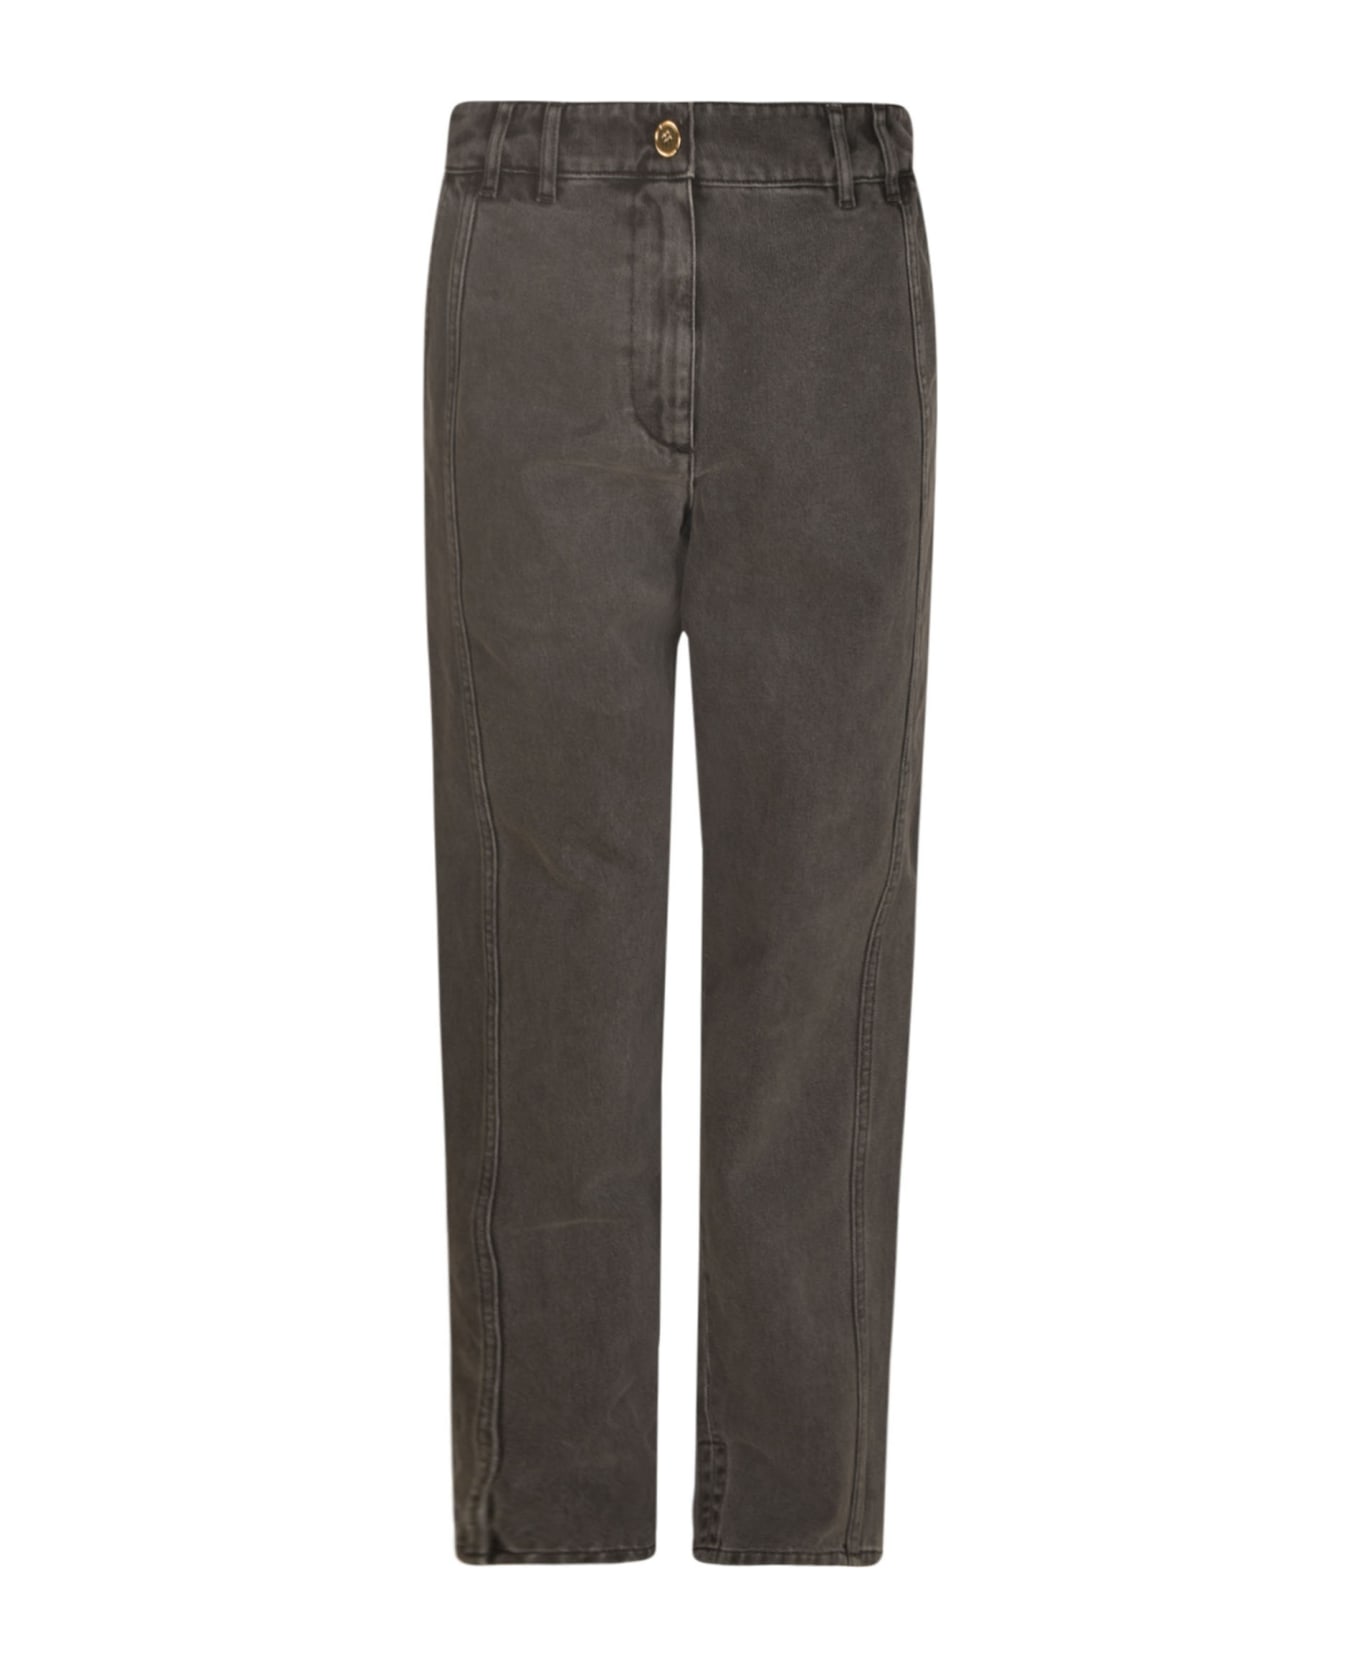 Patou Cargo Trousers - Anthracite